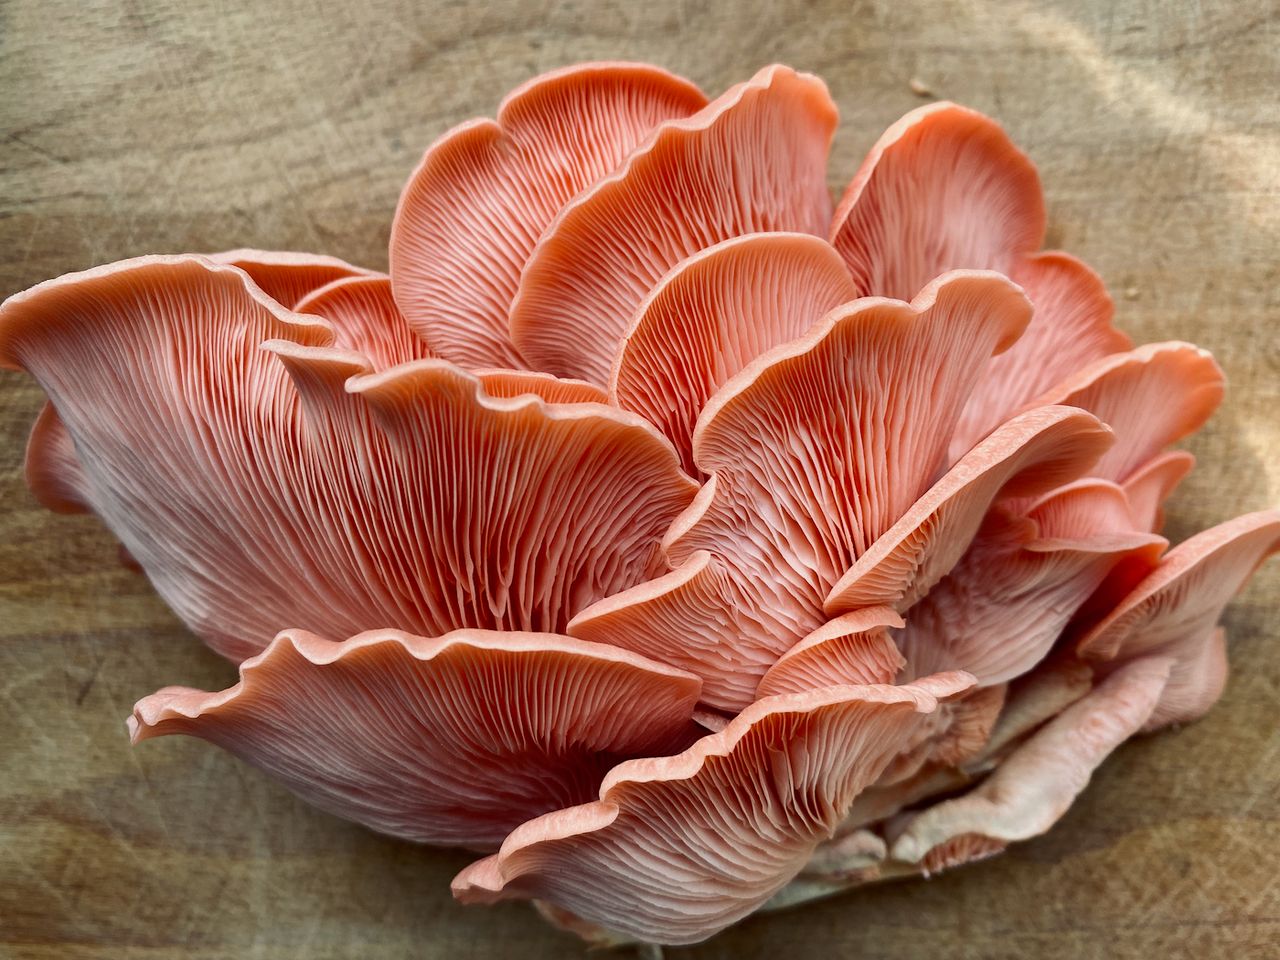 Pink oyster mushrooms laying on a wooden bench.